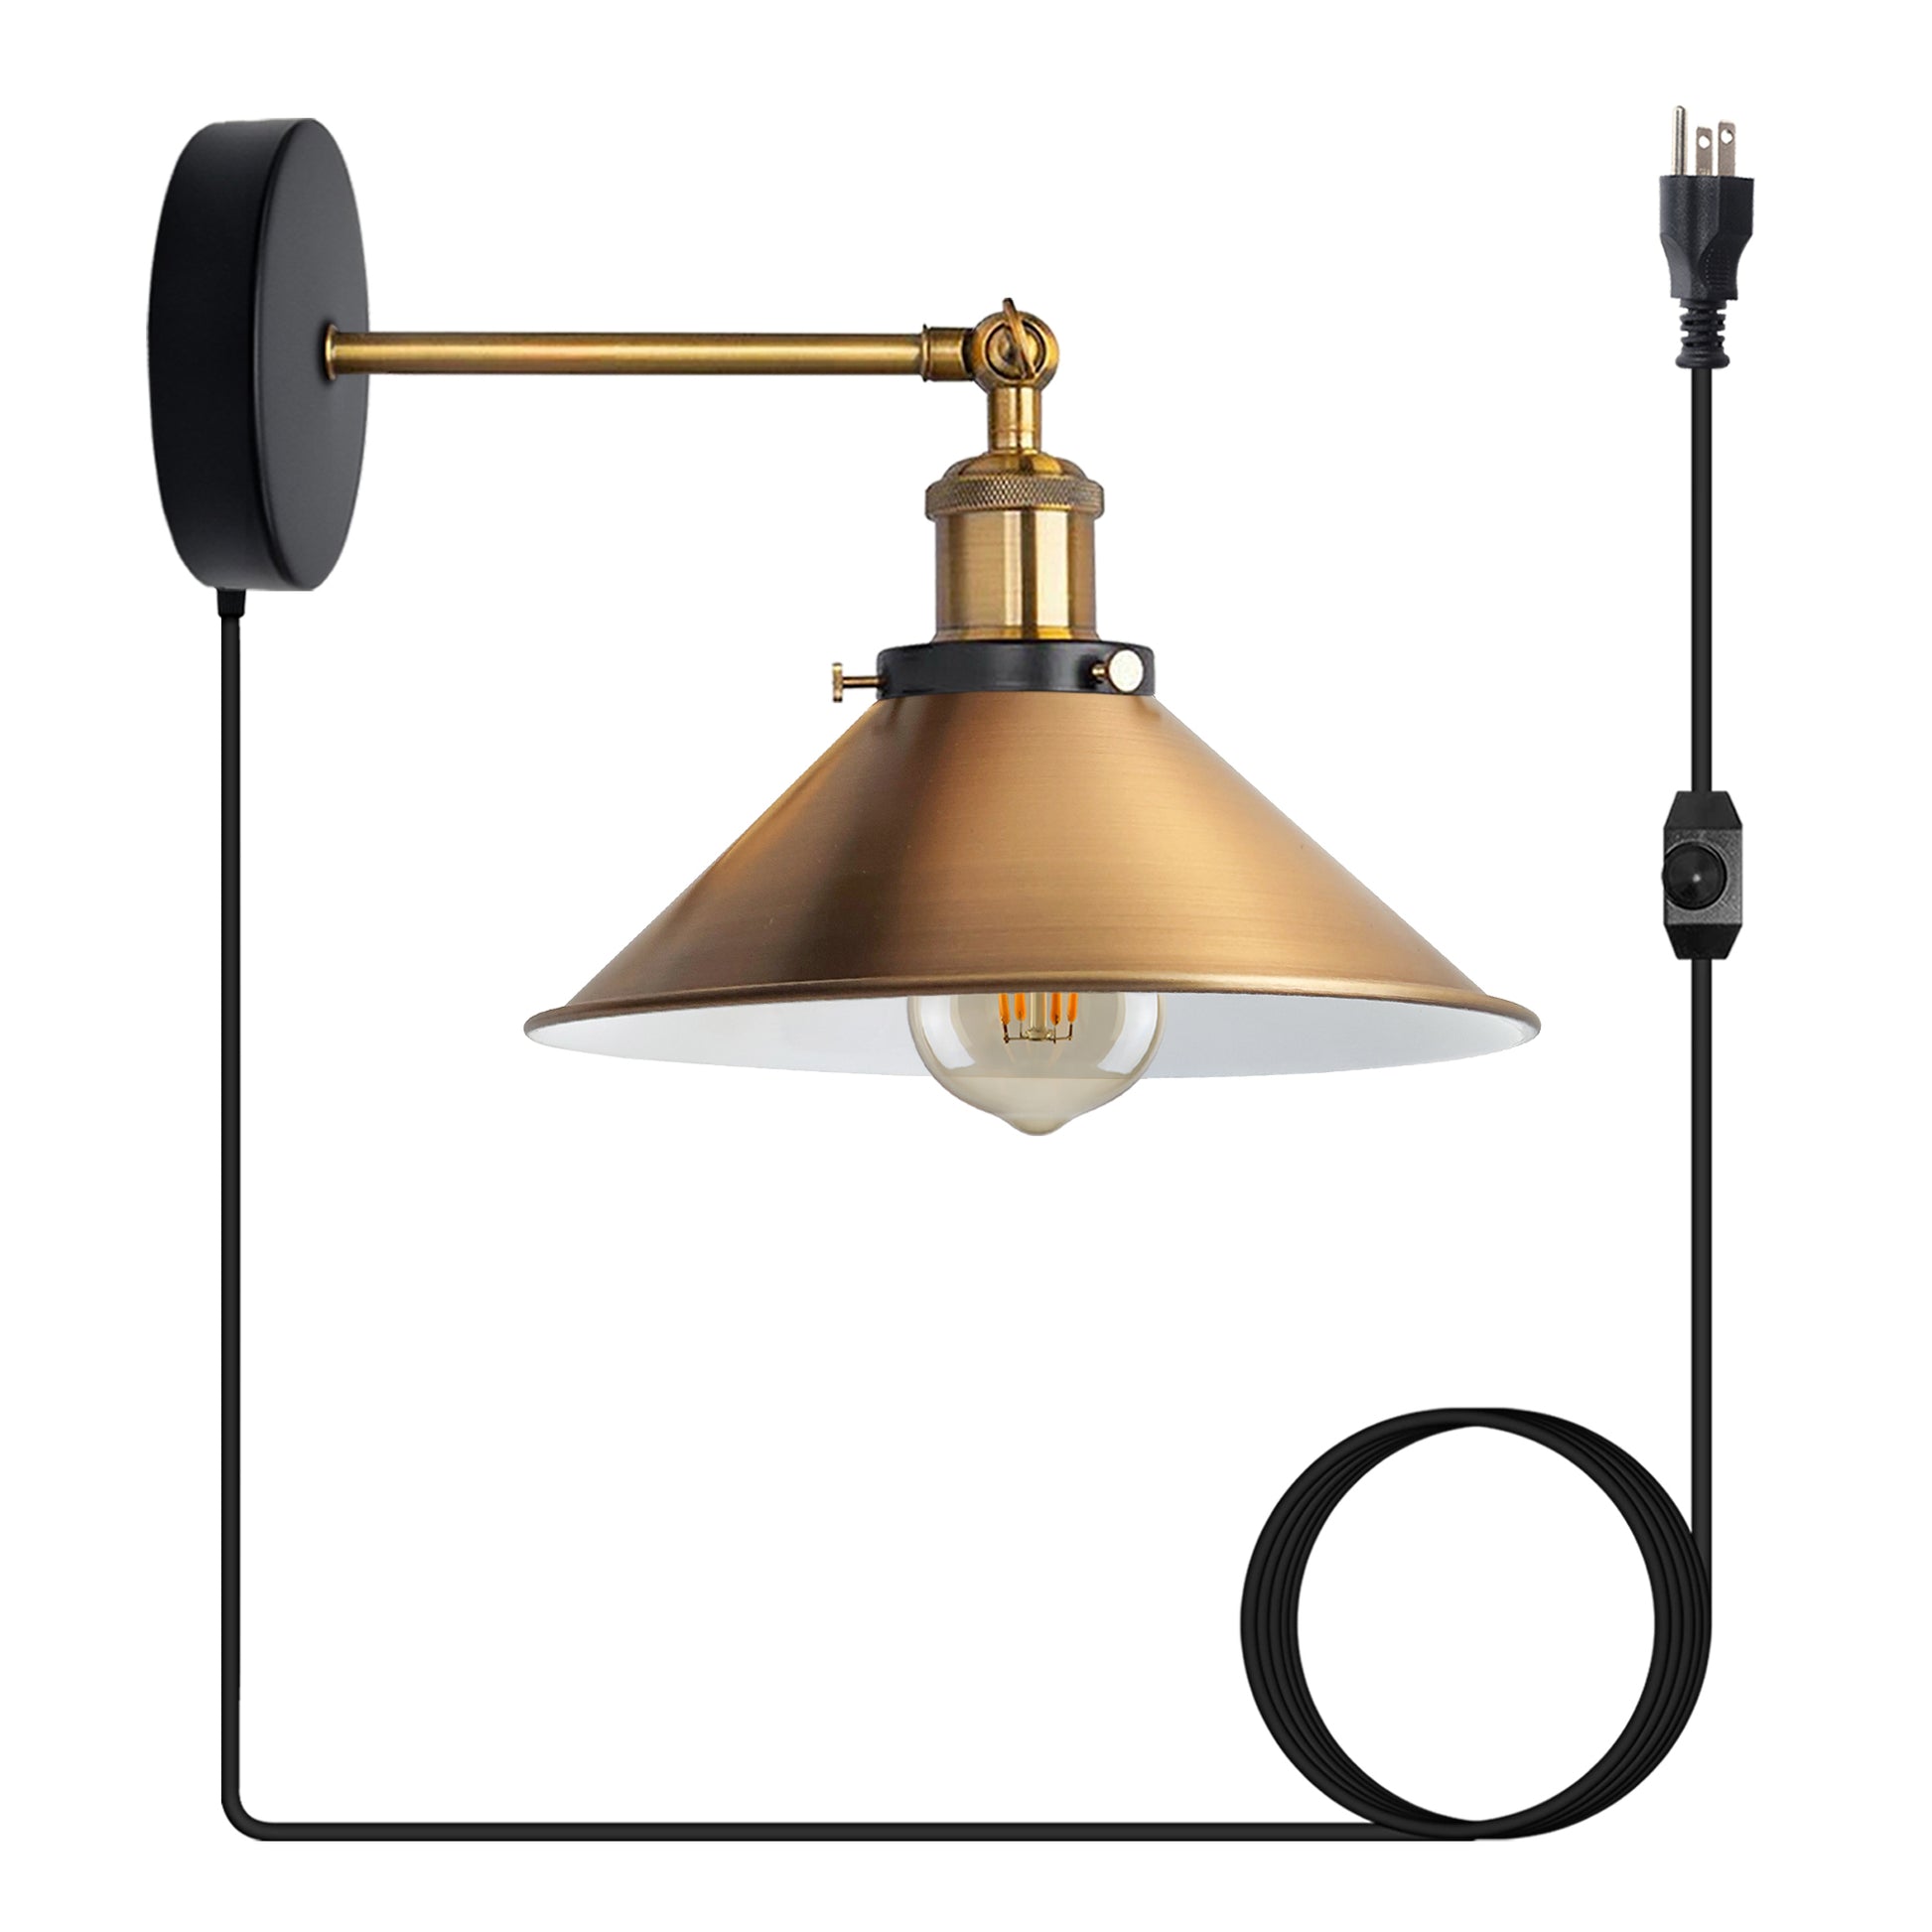 Yellow brass plug in wall light with dimmer switch.JPG